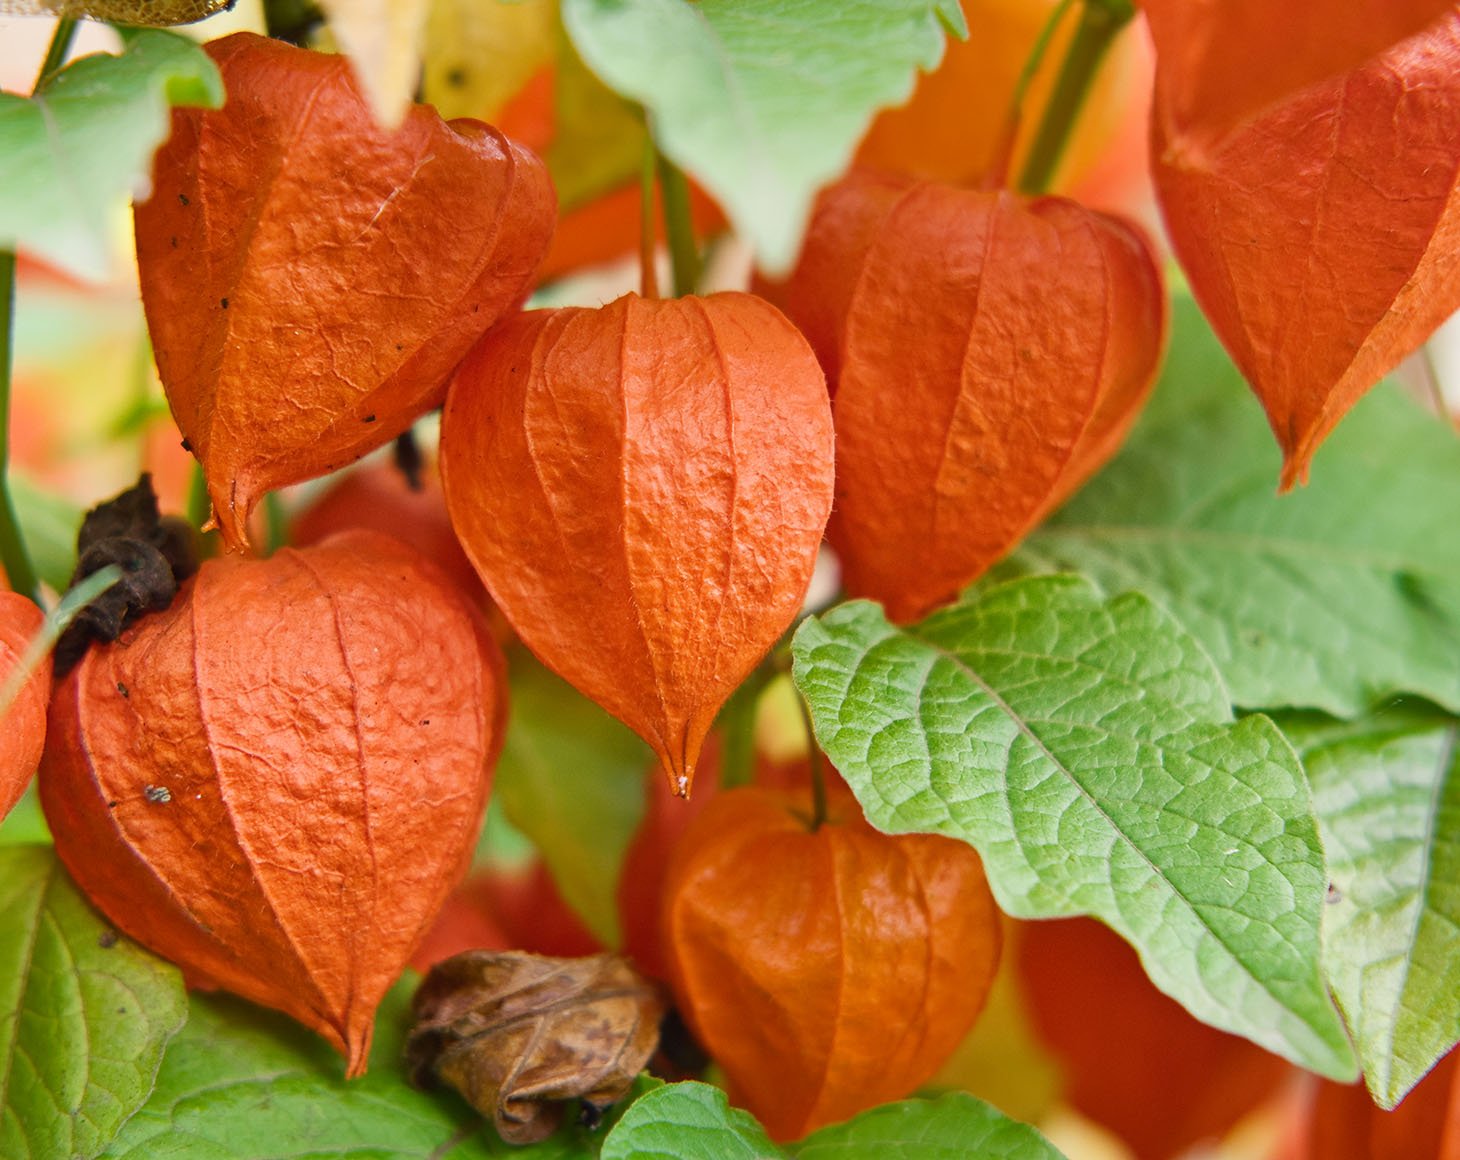 The physalis berry in red shell on branch. Orange lanterns of physalis among green leaves. Physalis gardening.